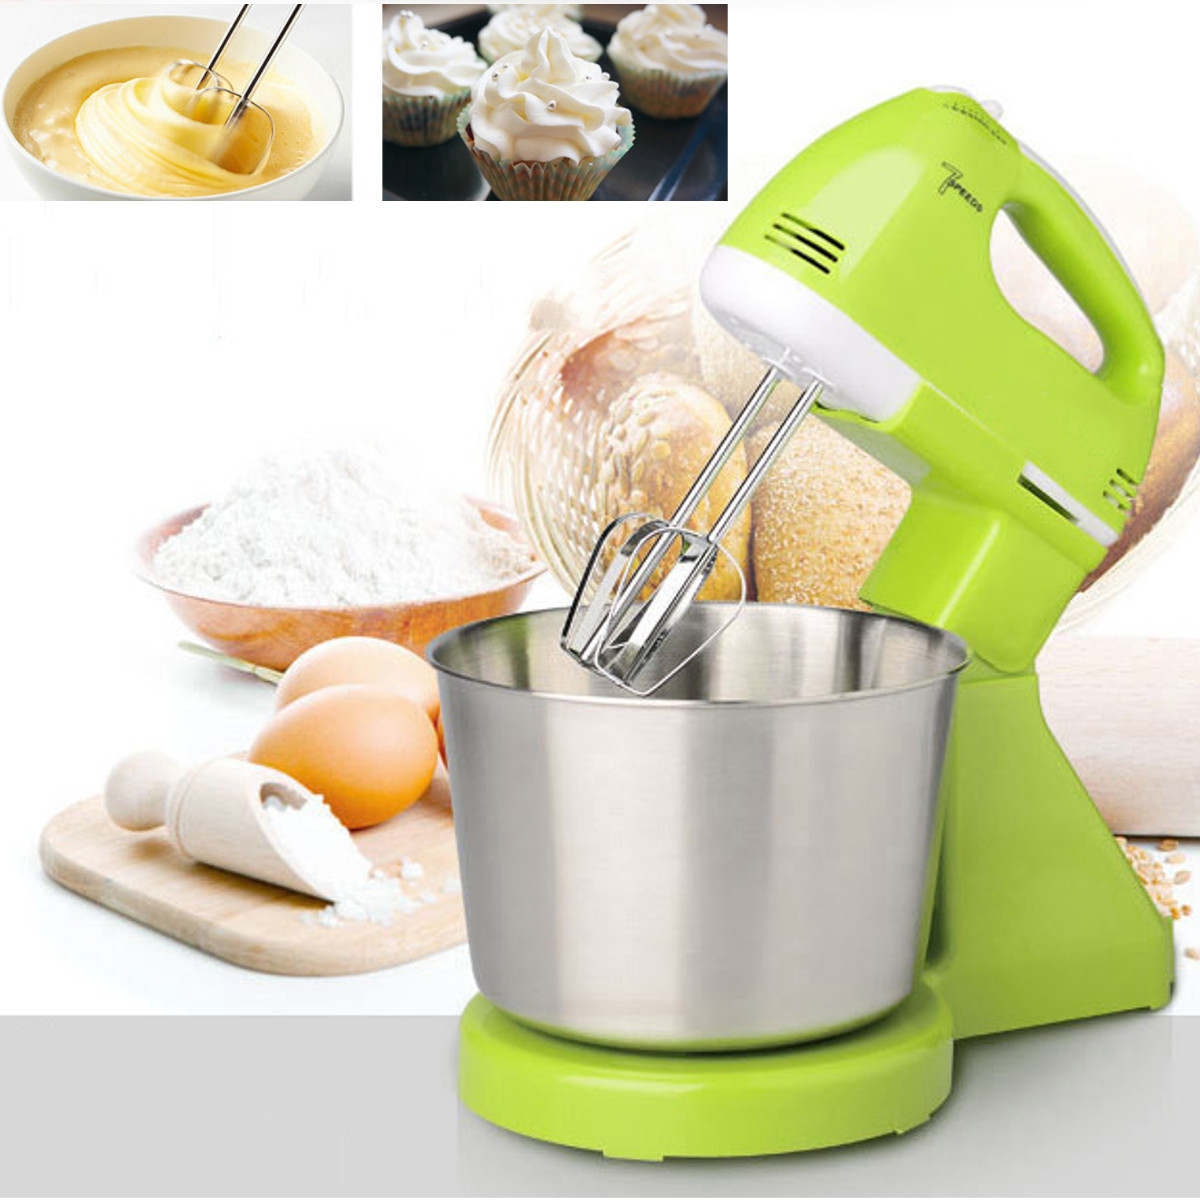 7 Speed Electric Egg Beater Dough Cakes Bread Egg Stand Mixer + Hand Blender + Bowl Food Mixer Kitchen Accessories Egg Tools 71